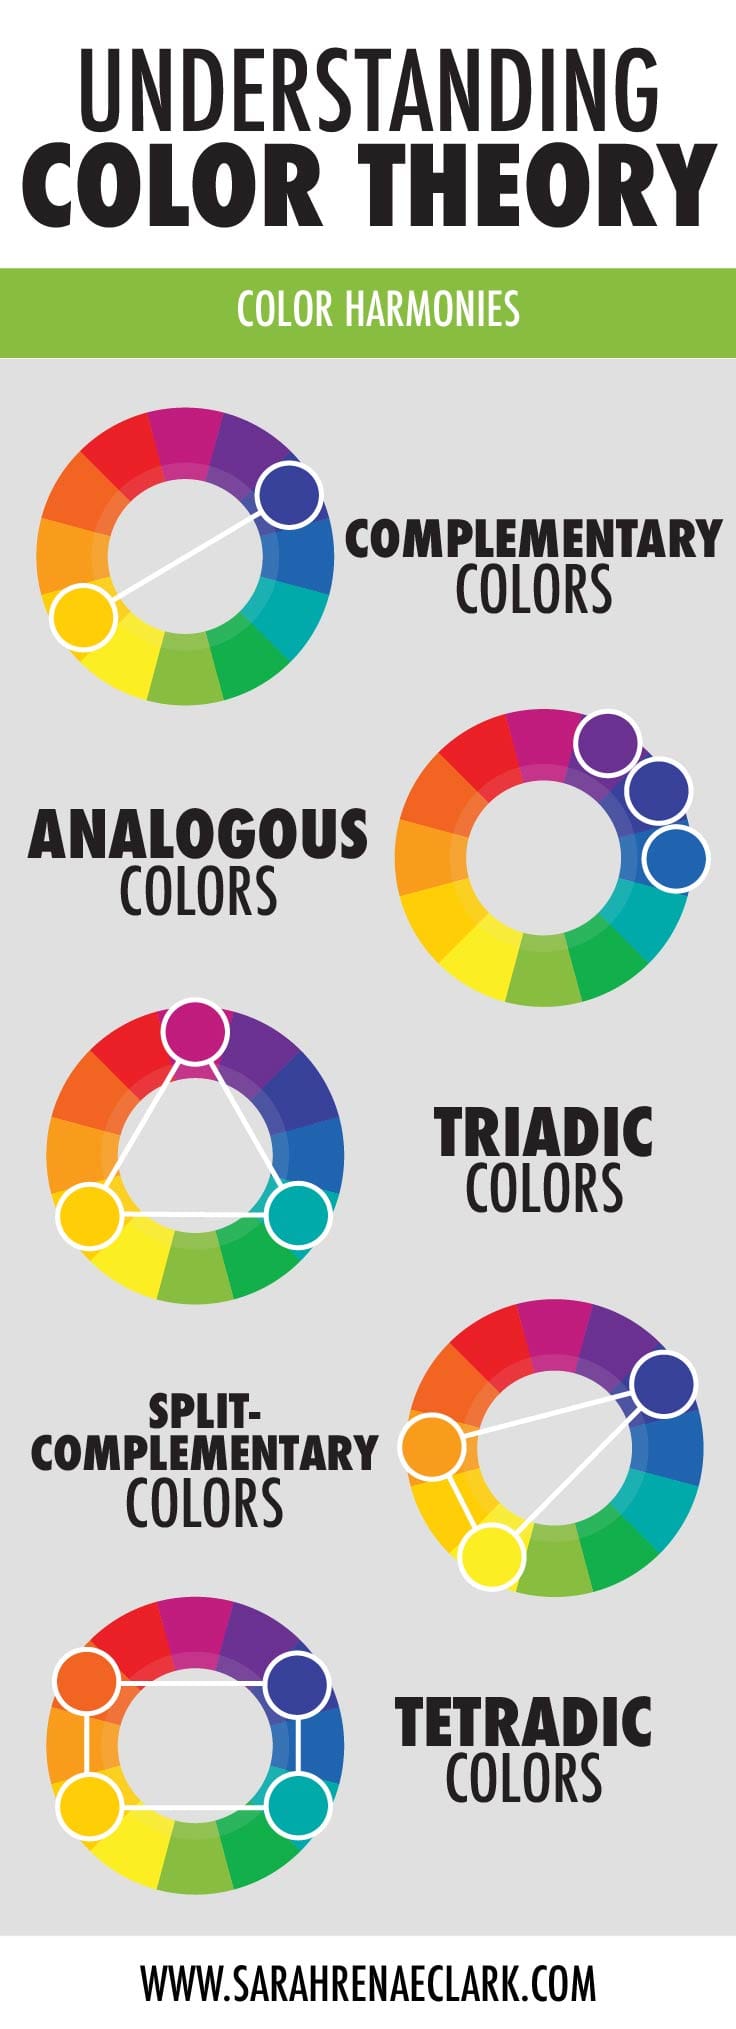 Learn about color harmonies including complementary colors, analogous colors, triadic colors, split-complementary colors and tetradic colors. Read more about basic color theory at www.sarahrenaeclark.com #colortheory #color